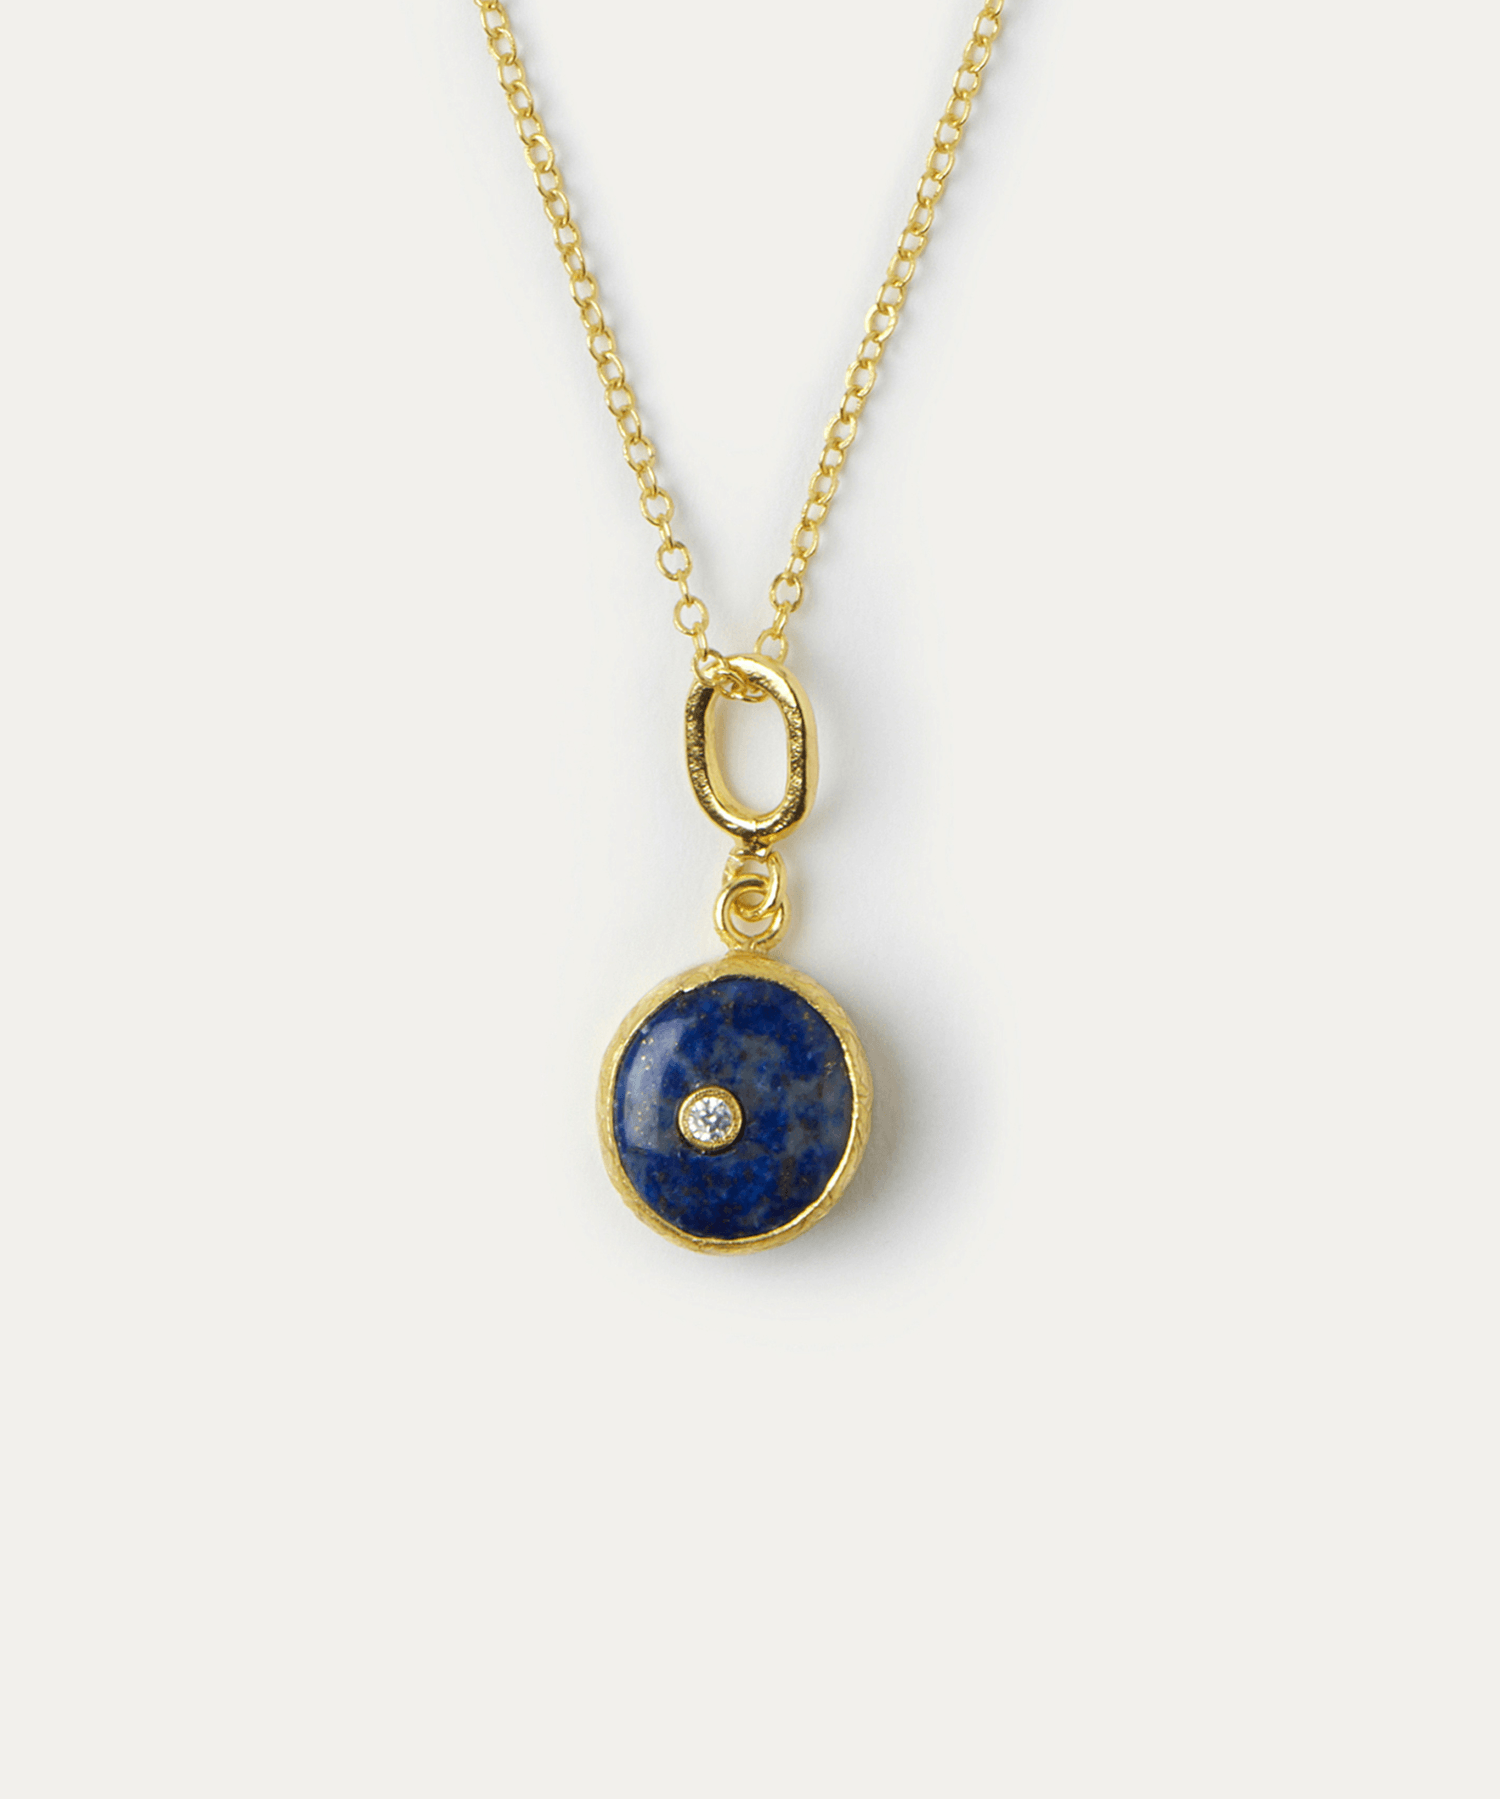 Amalfi Lapis Pendant Necklace | Sustainable Jewellery by Ottoman Hands